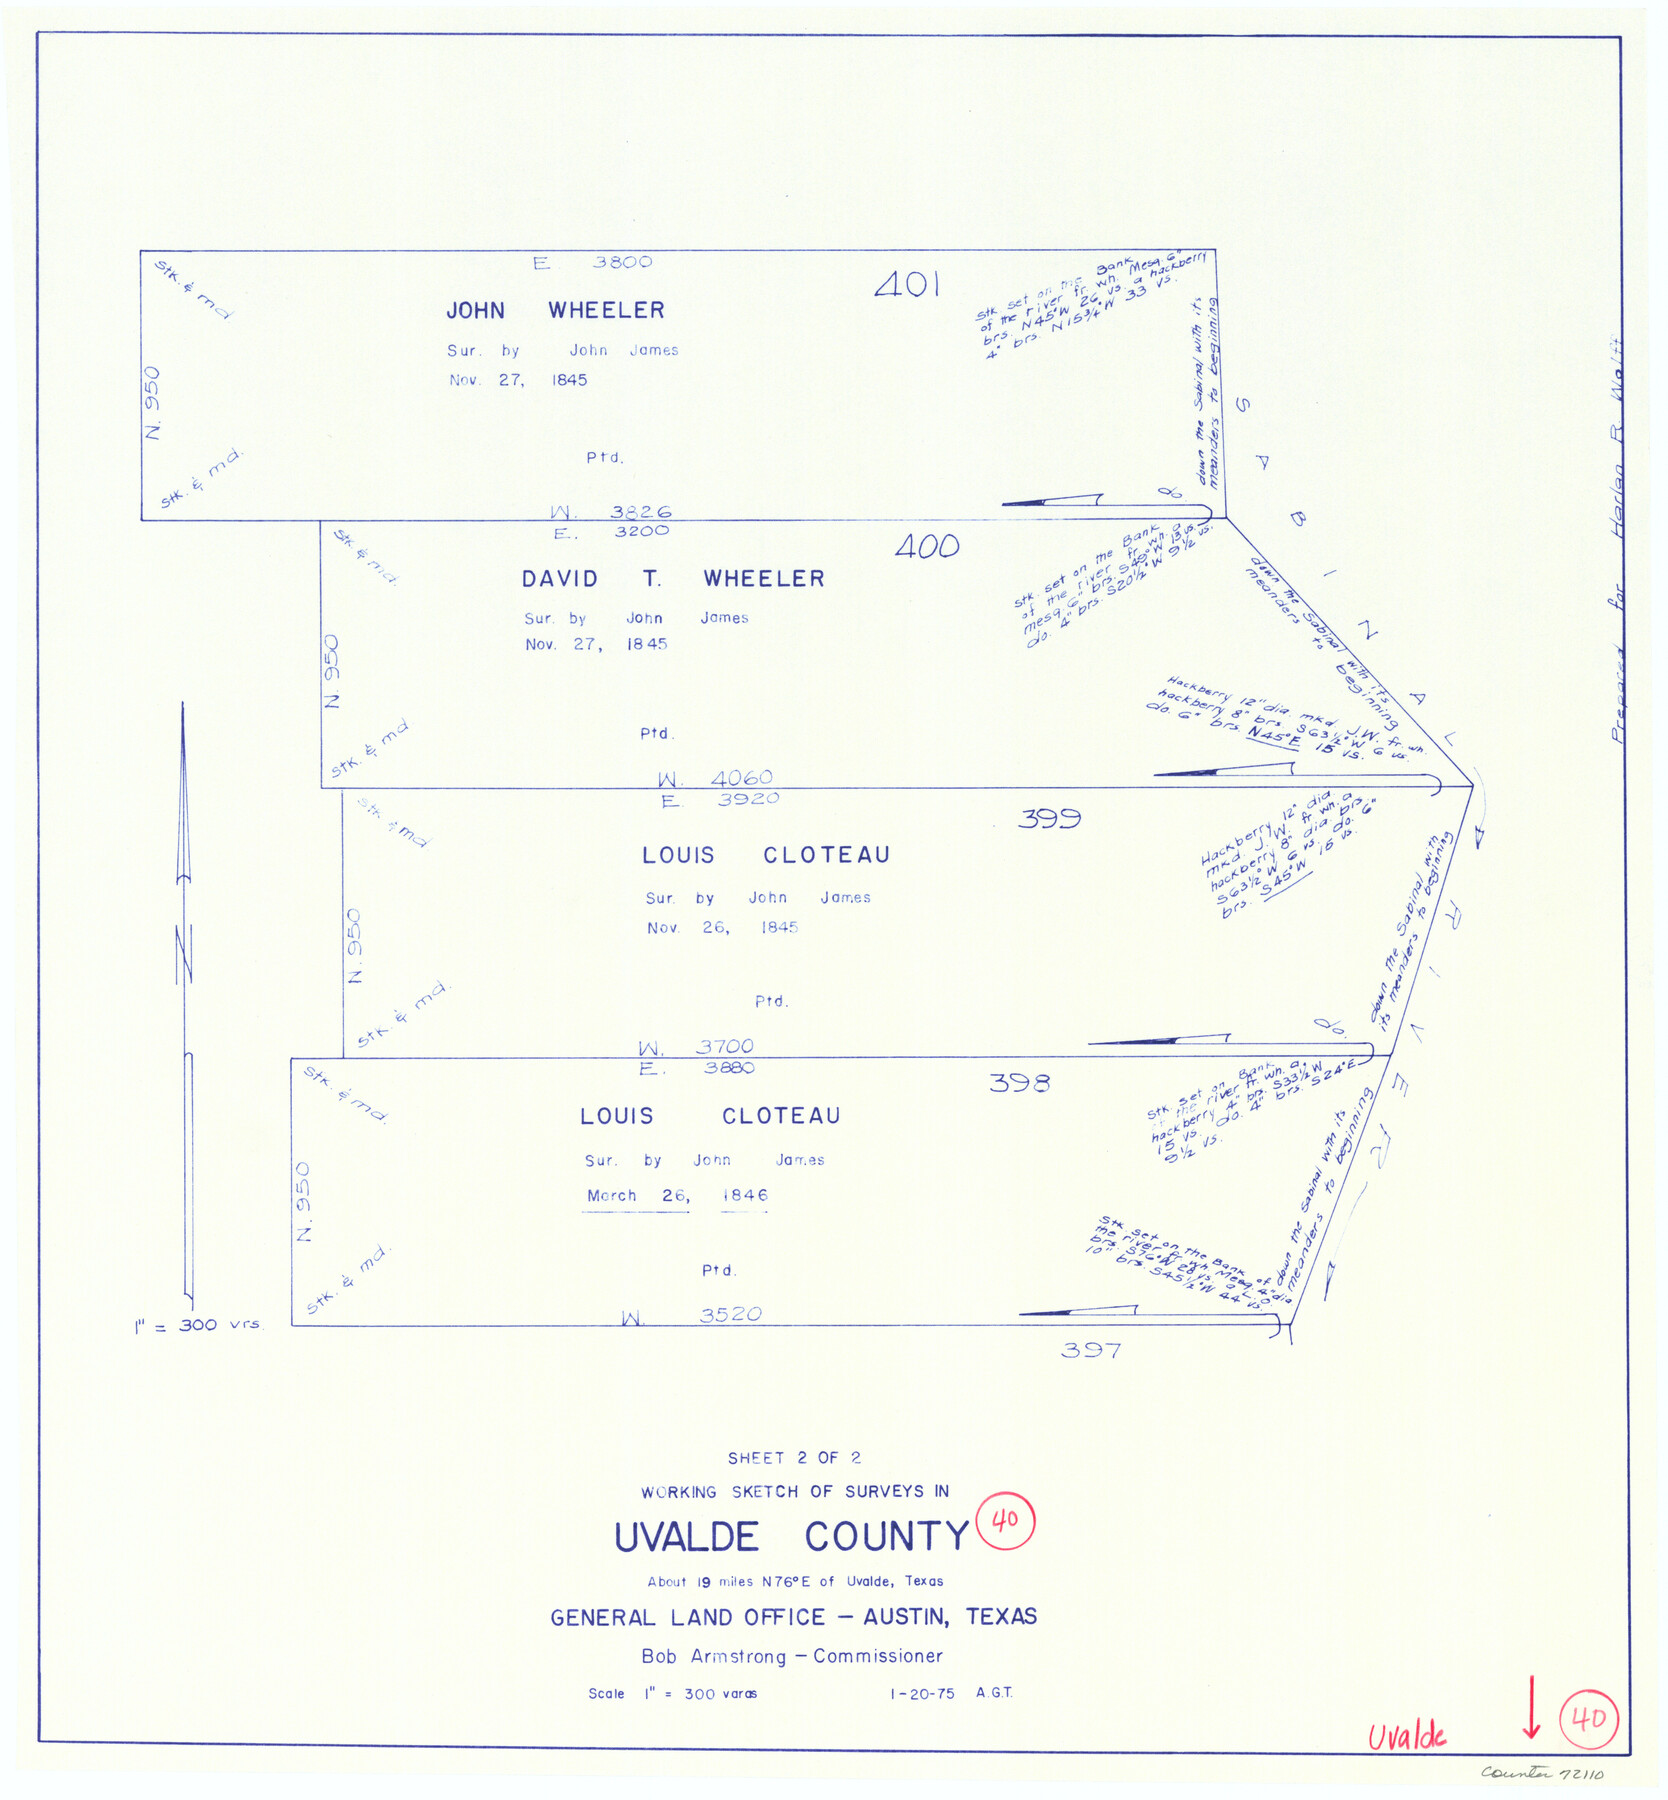 72110, Uvalde County Working Sketch 40, General Map Collection